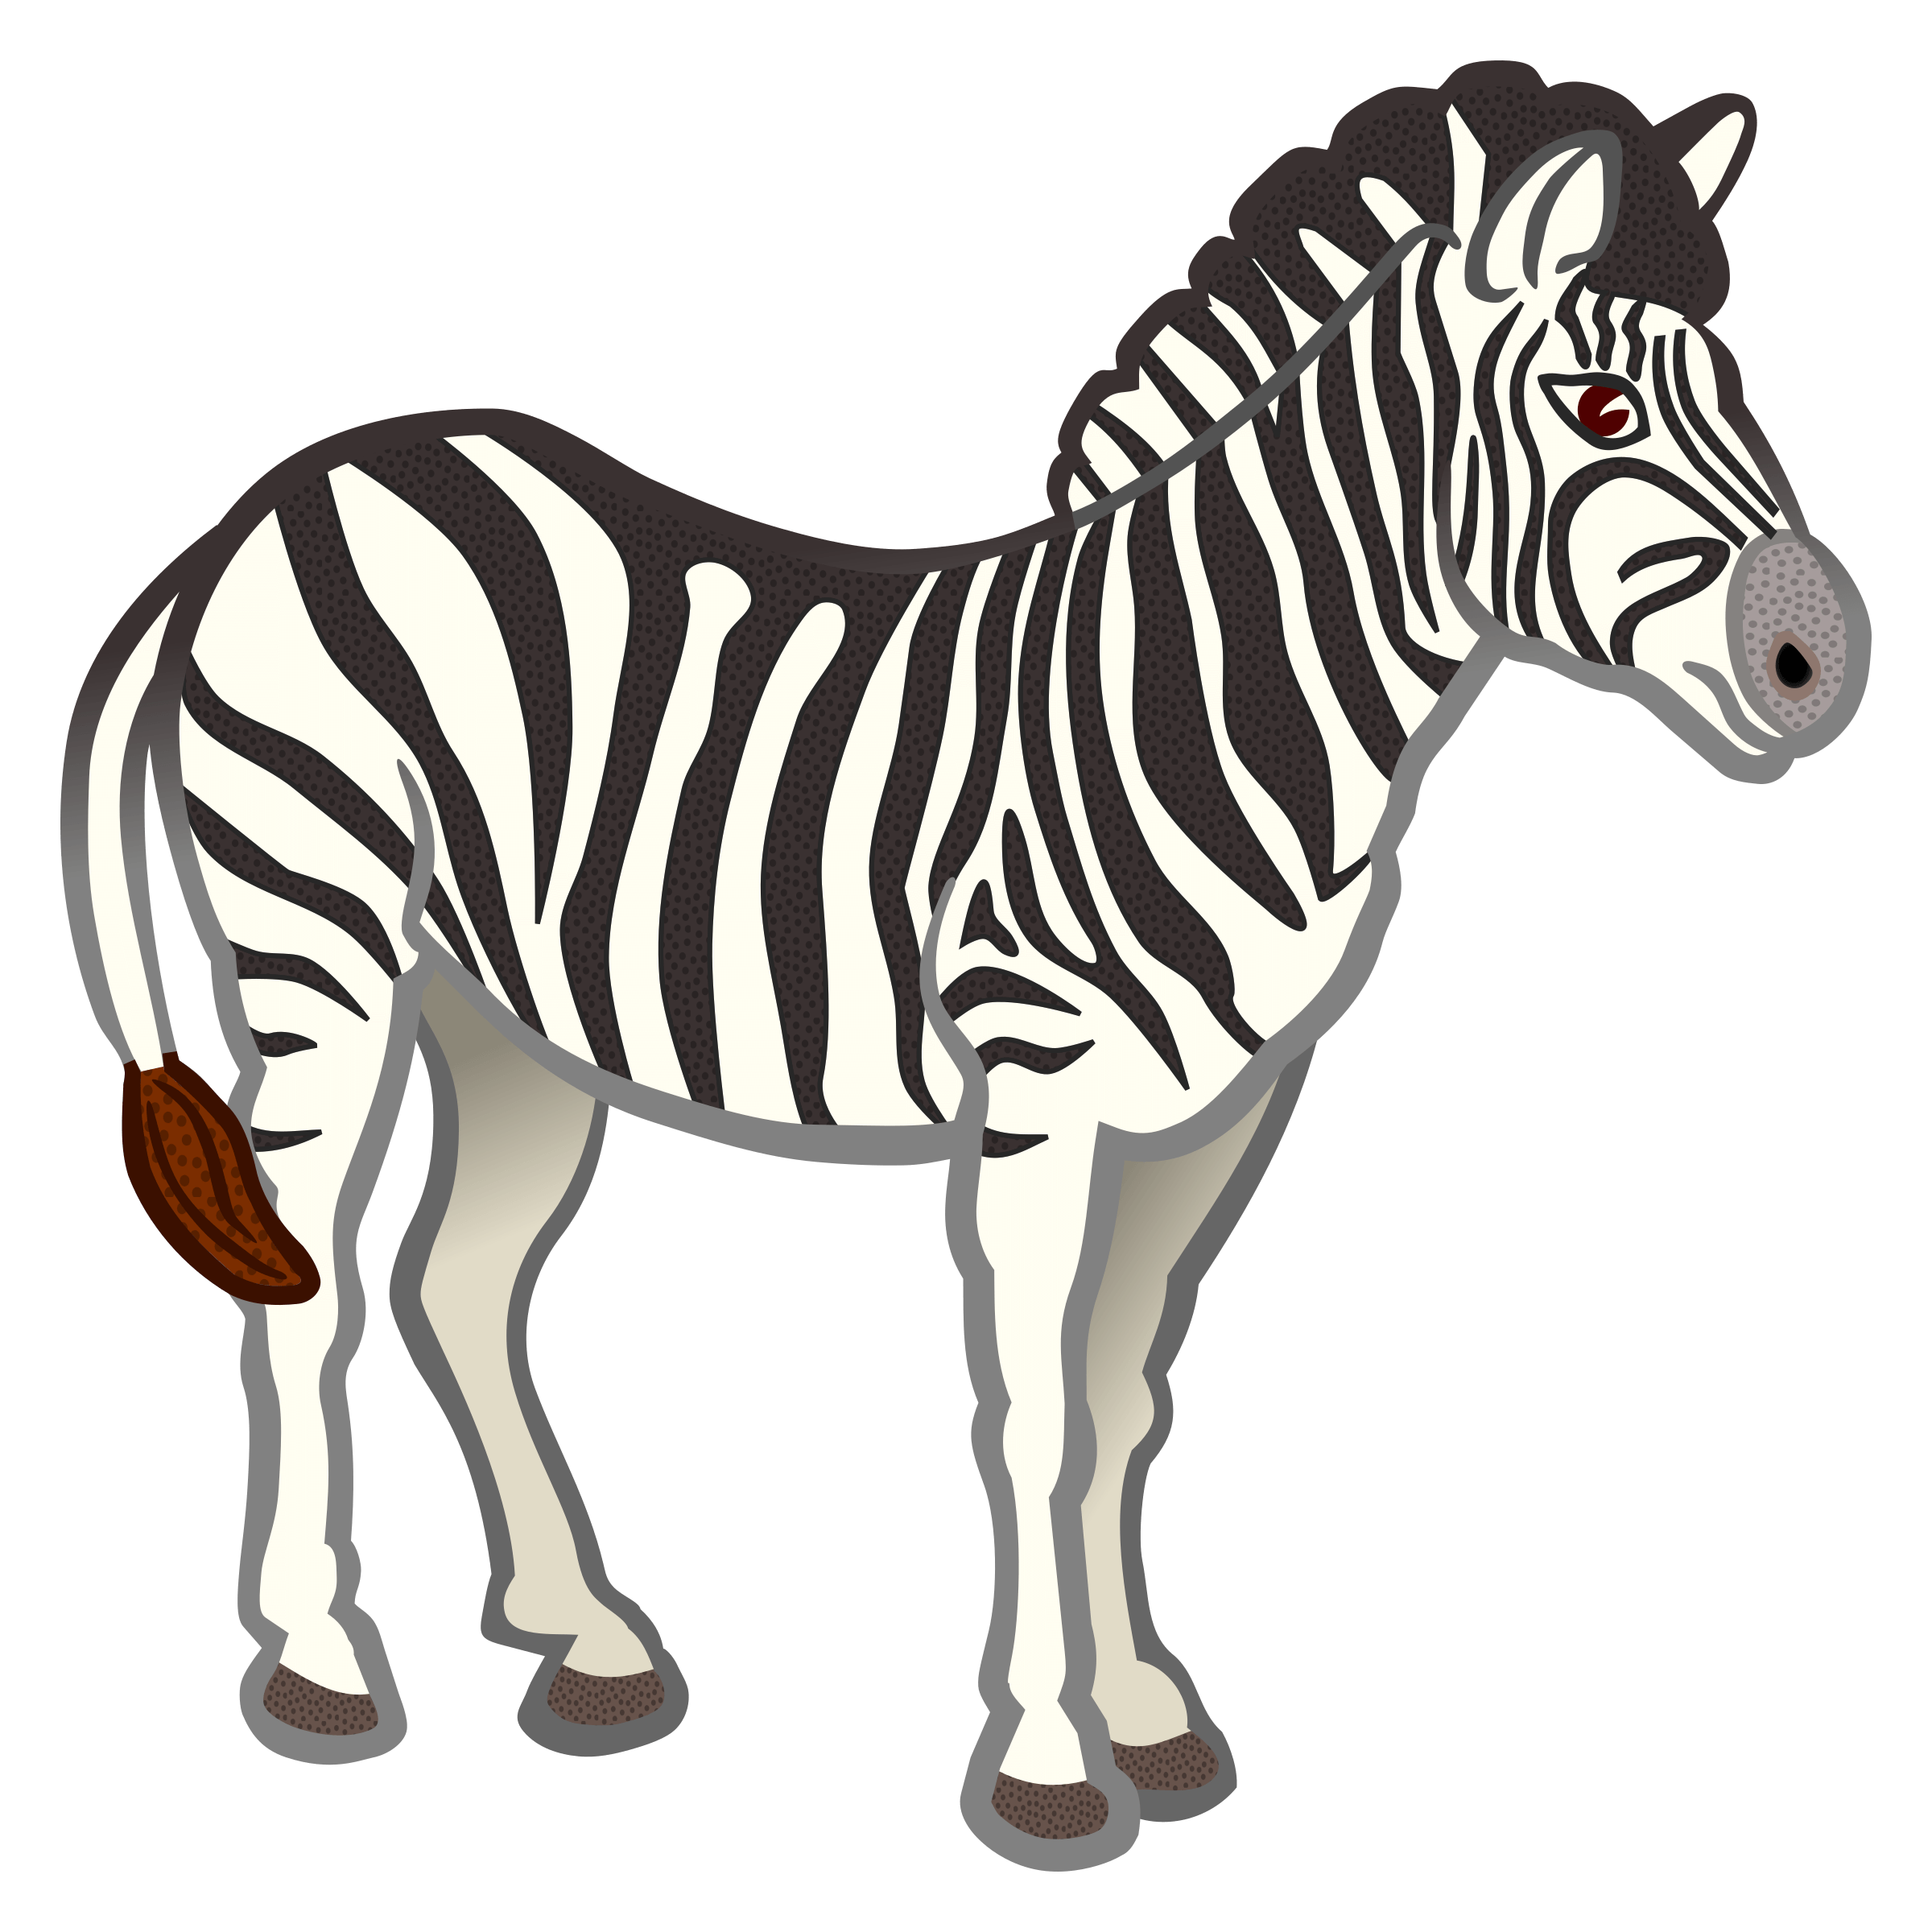 Clip Arts Related To : jungle animals clipart png. view all Boy Zebra Clipa...